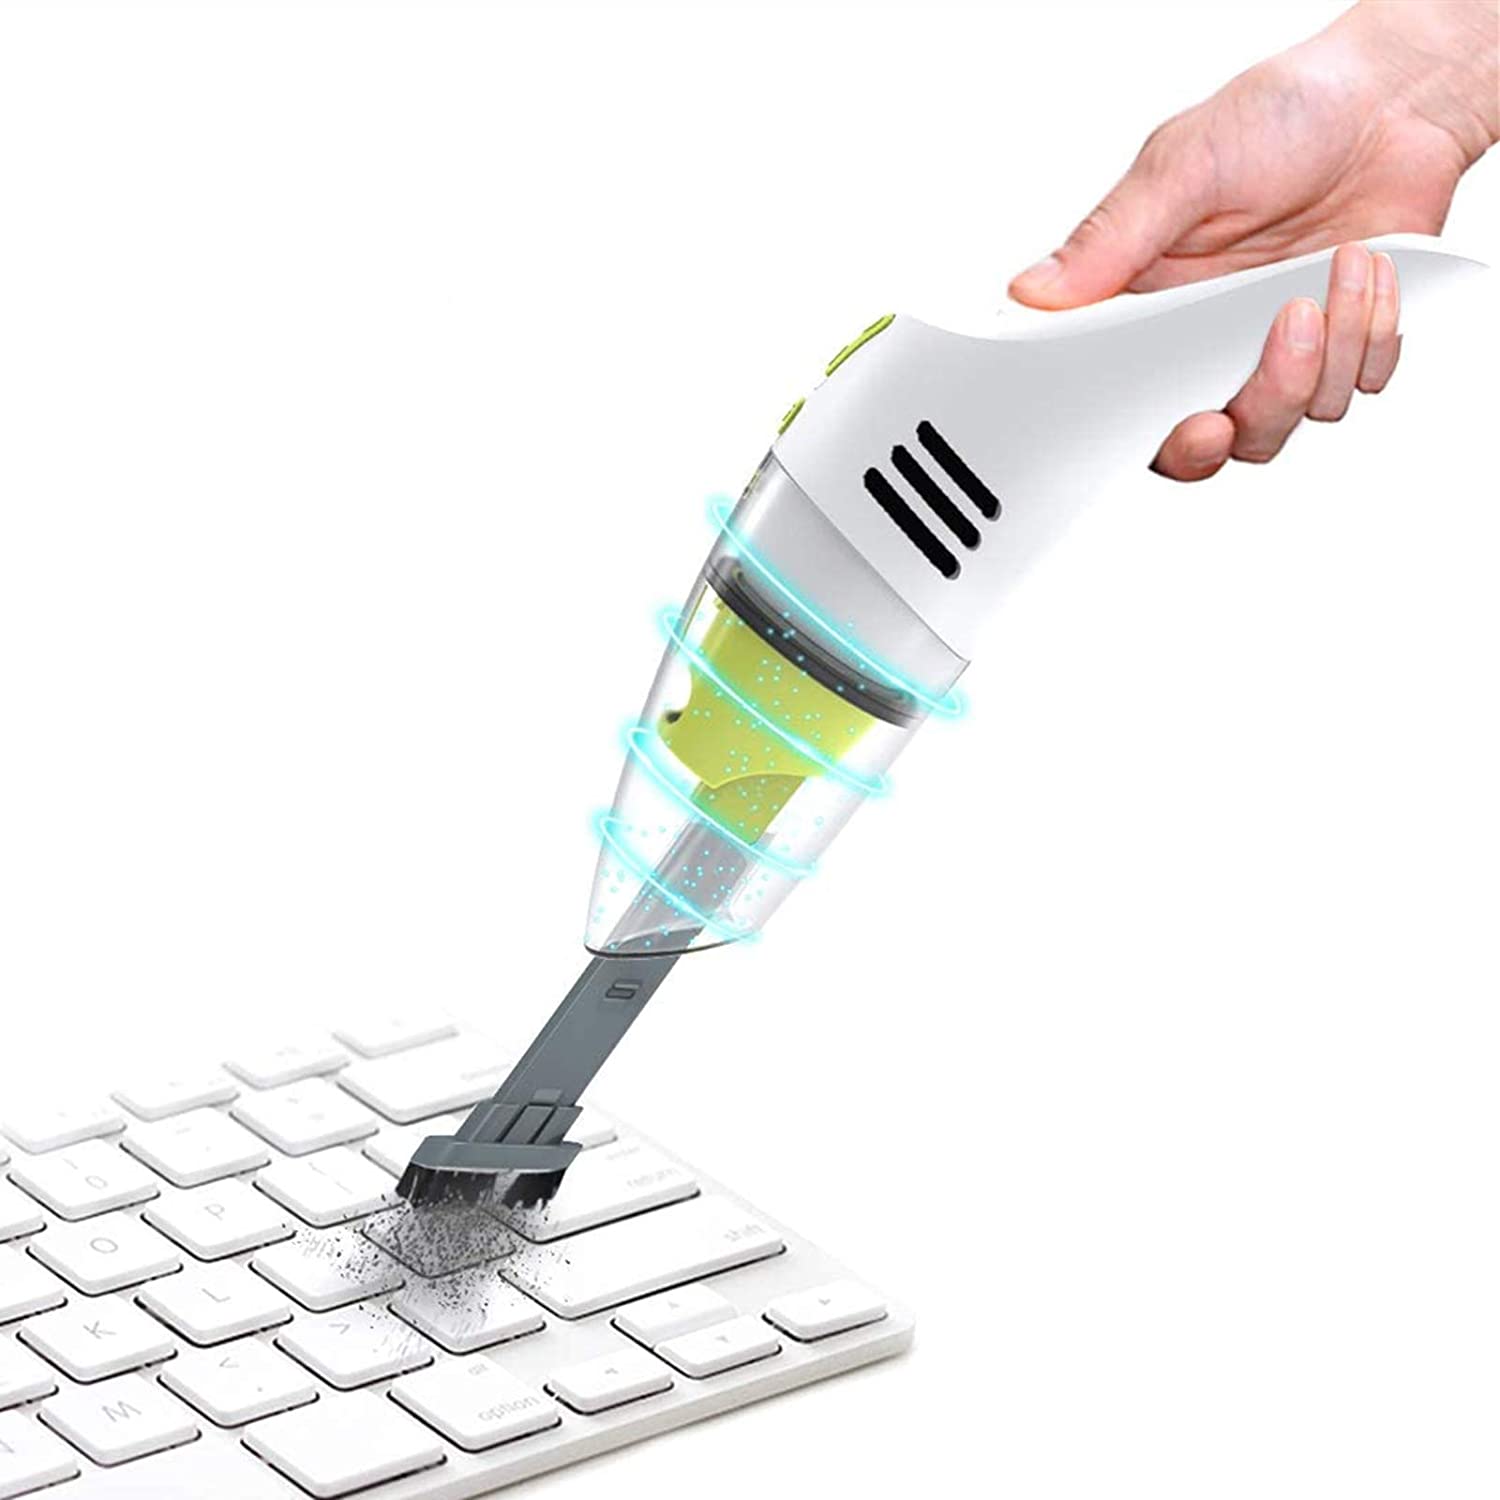 dongba Mini Computer Vacuum Keyboard Cleaner PC Laptop Brush Dust Cleaning Kit Computer Vacuums 